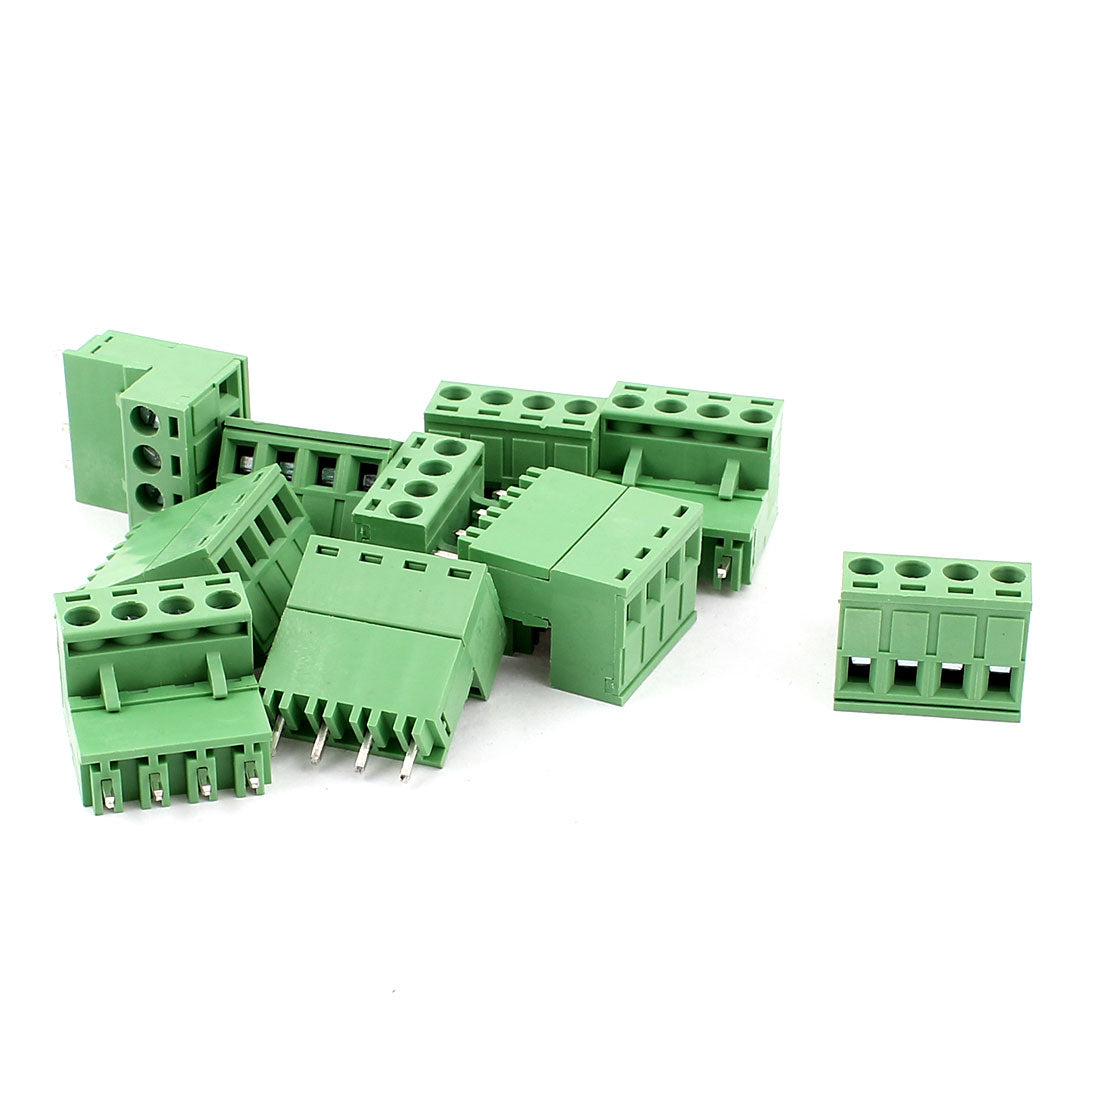 uxcell Uxcell 10 Pcs AC 300V 10A 4 Pins PCB Screw Terminal Block Connector 5.08mm Pitch Green